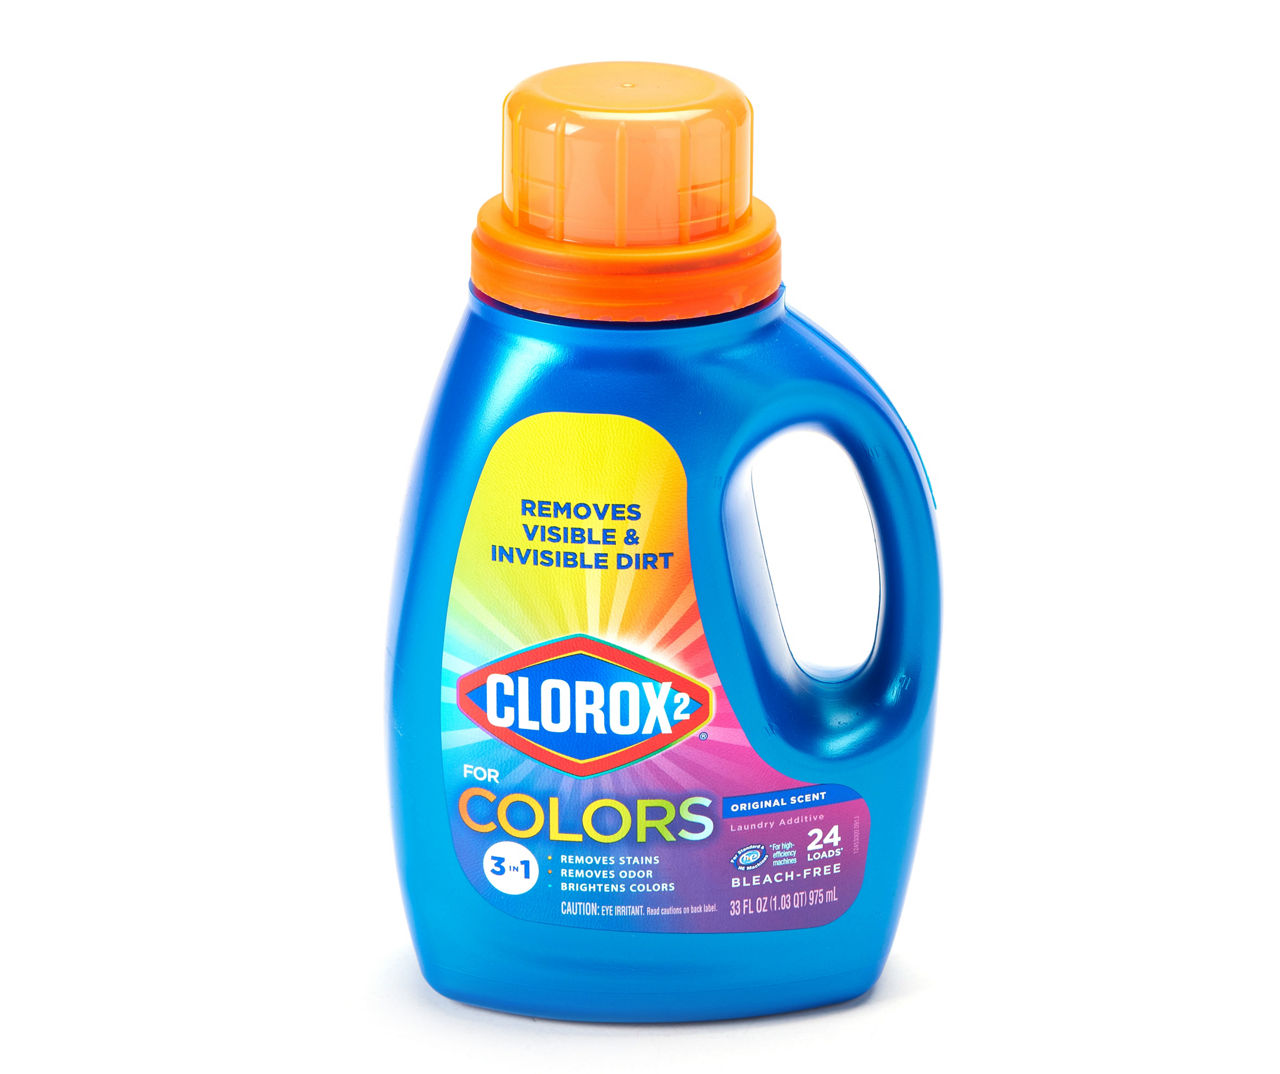 Clorox Bleach Stain Remover For Whites Review